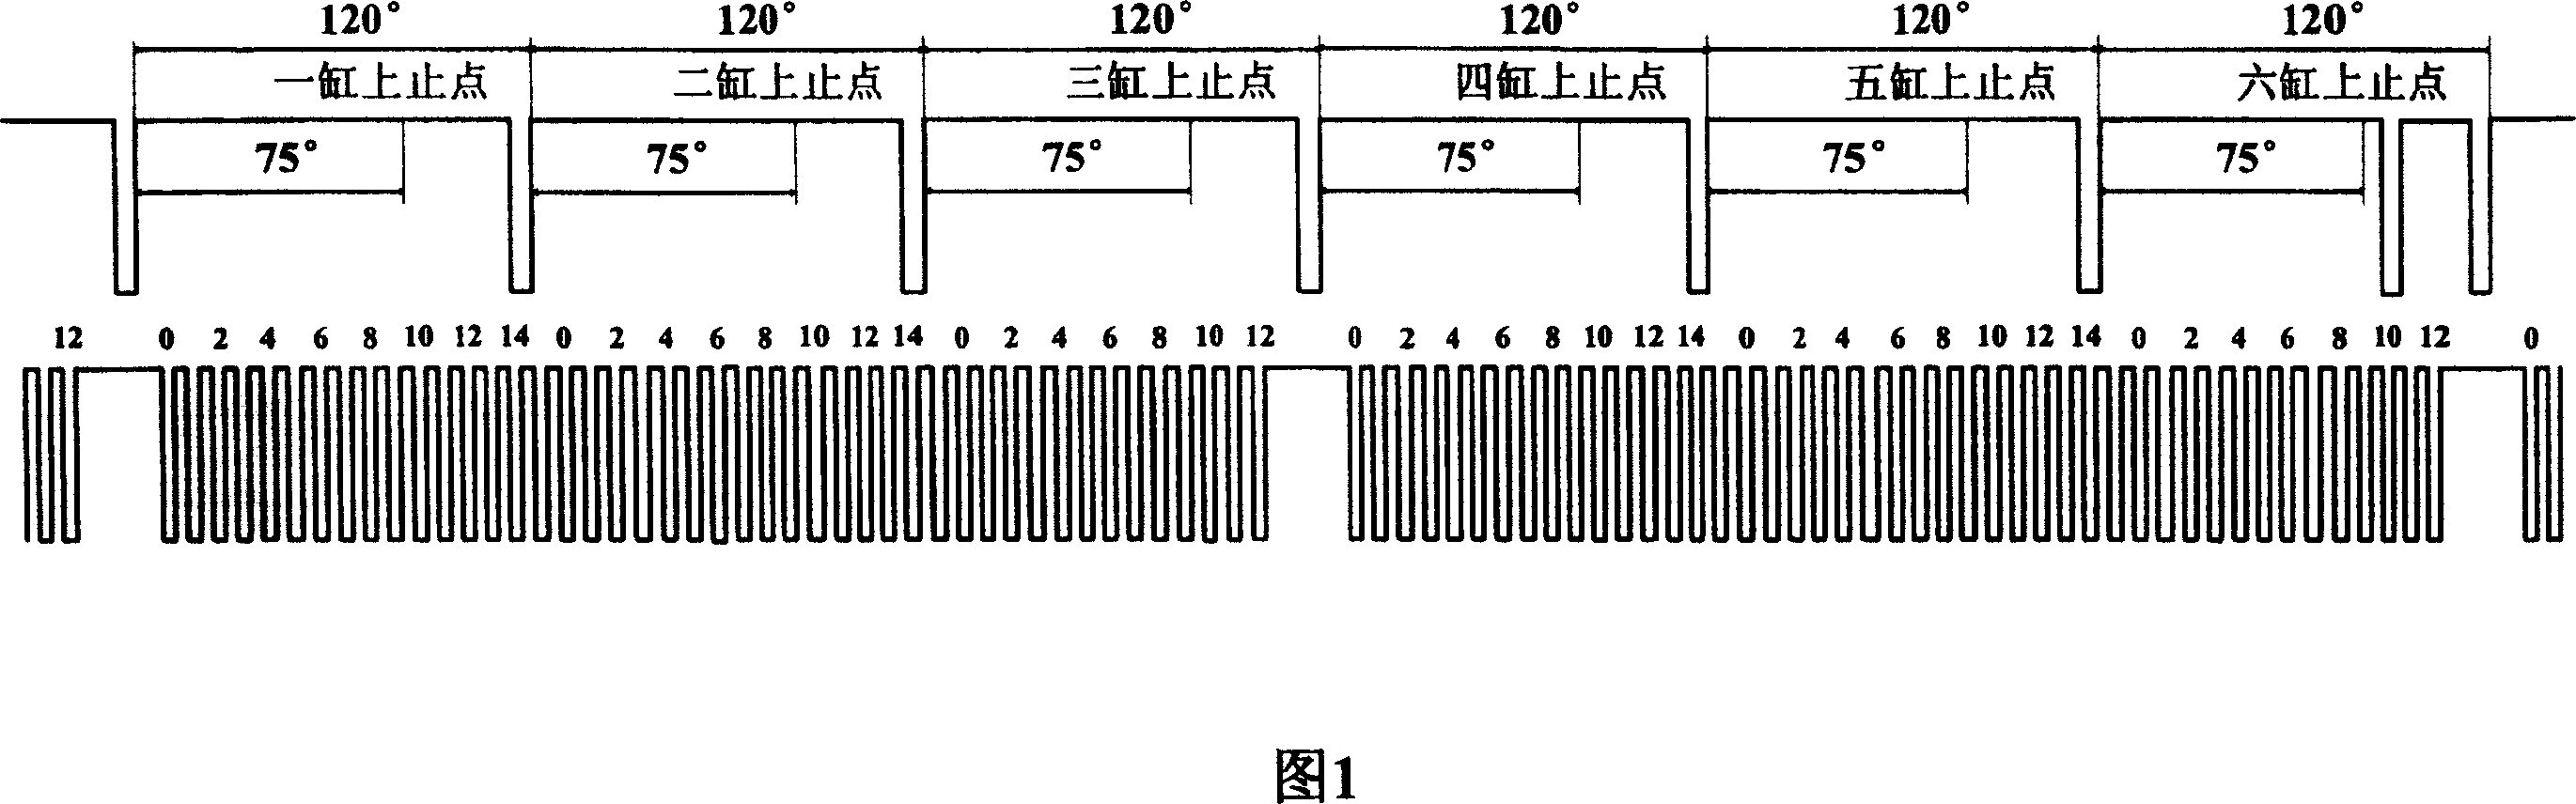 Common-rail fuel oil injection system injector failure diagnosing method